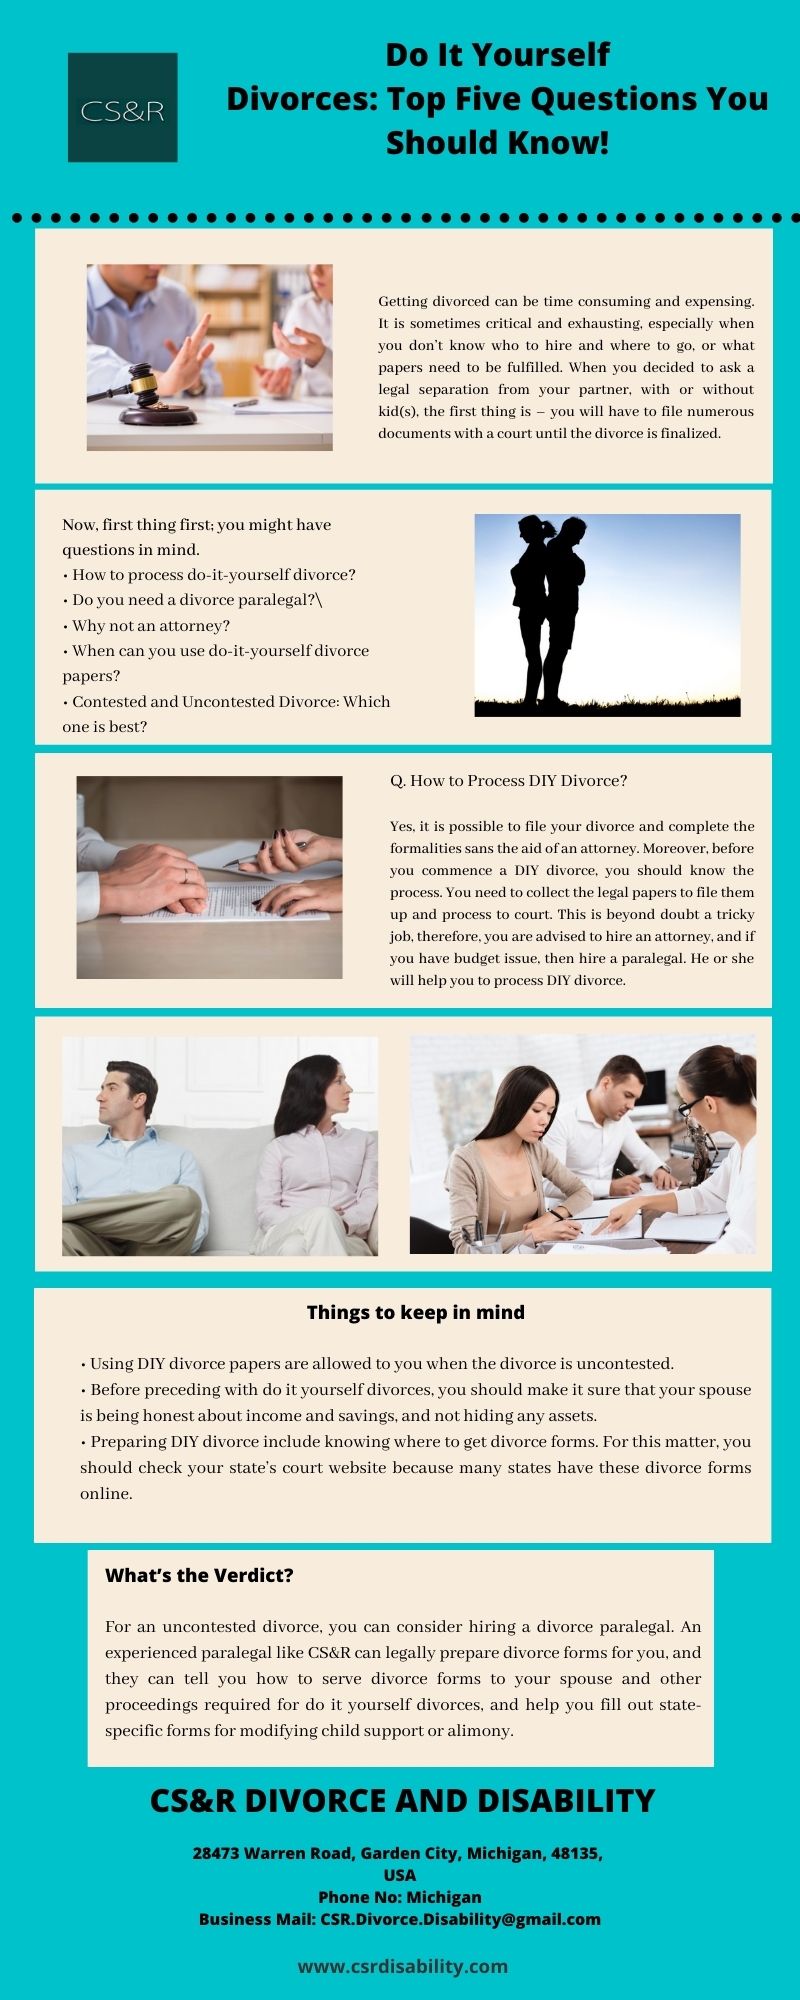 Do It Yourself Divorces Top Five Questions You Should Know!.jpg  by Csrdisability1